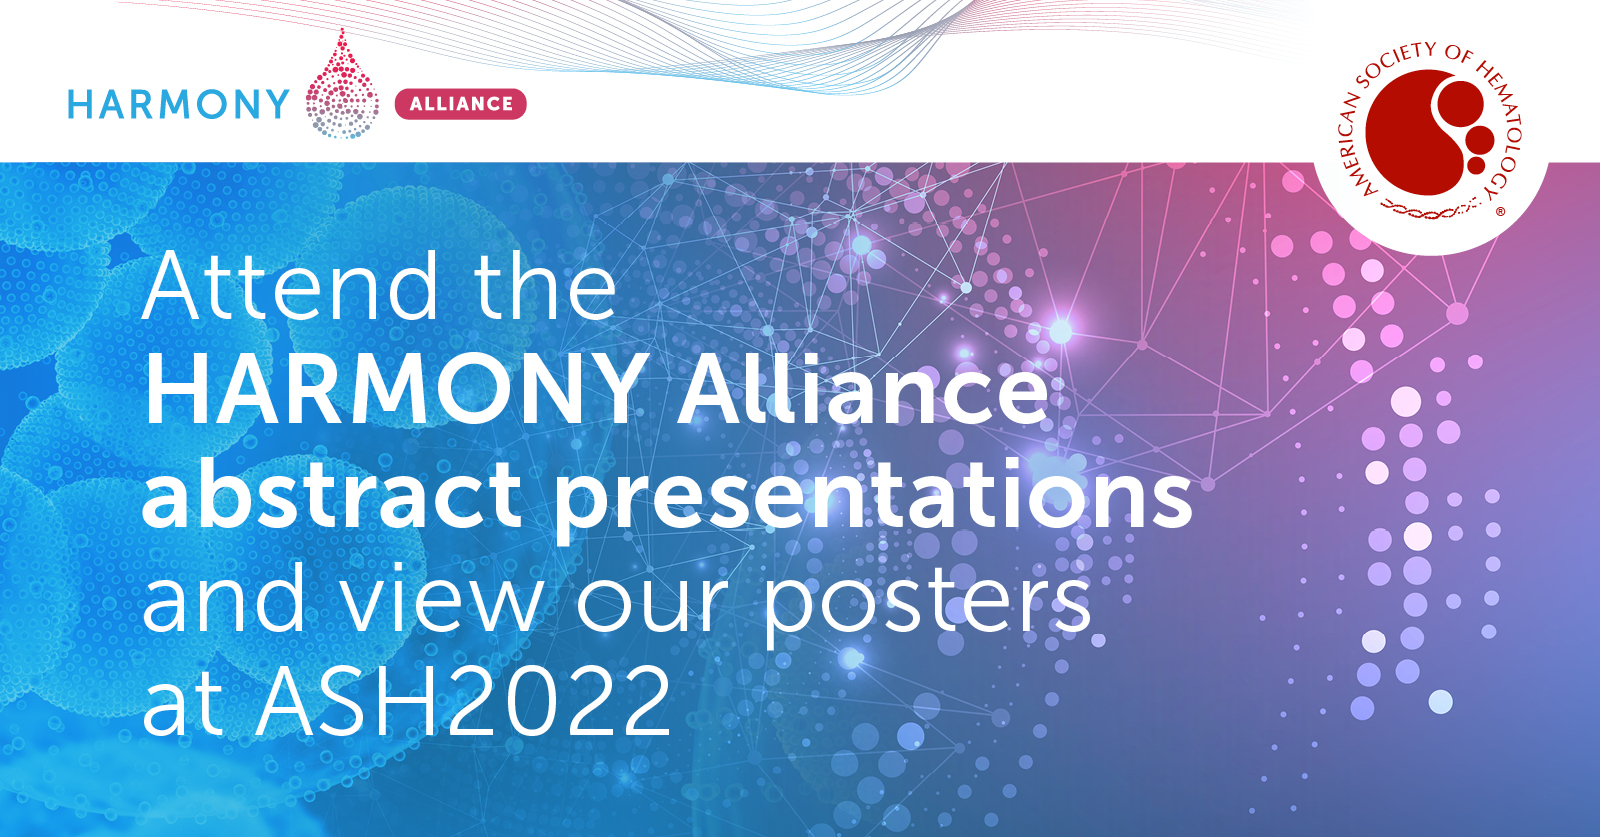 New results at the Annual Meeting of the American Society of Hematology